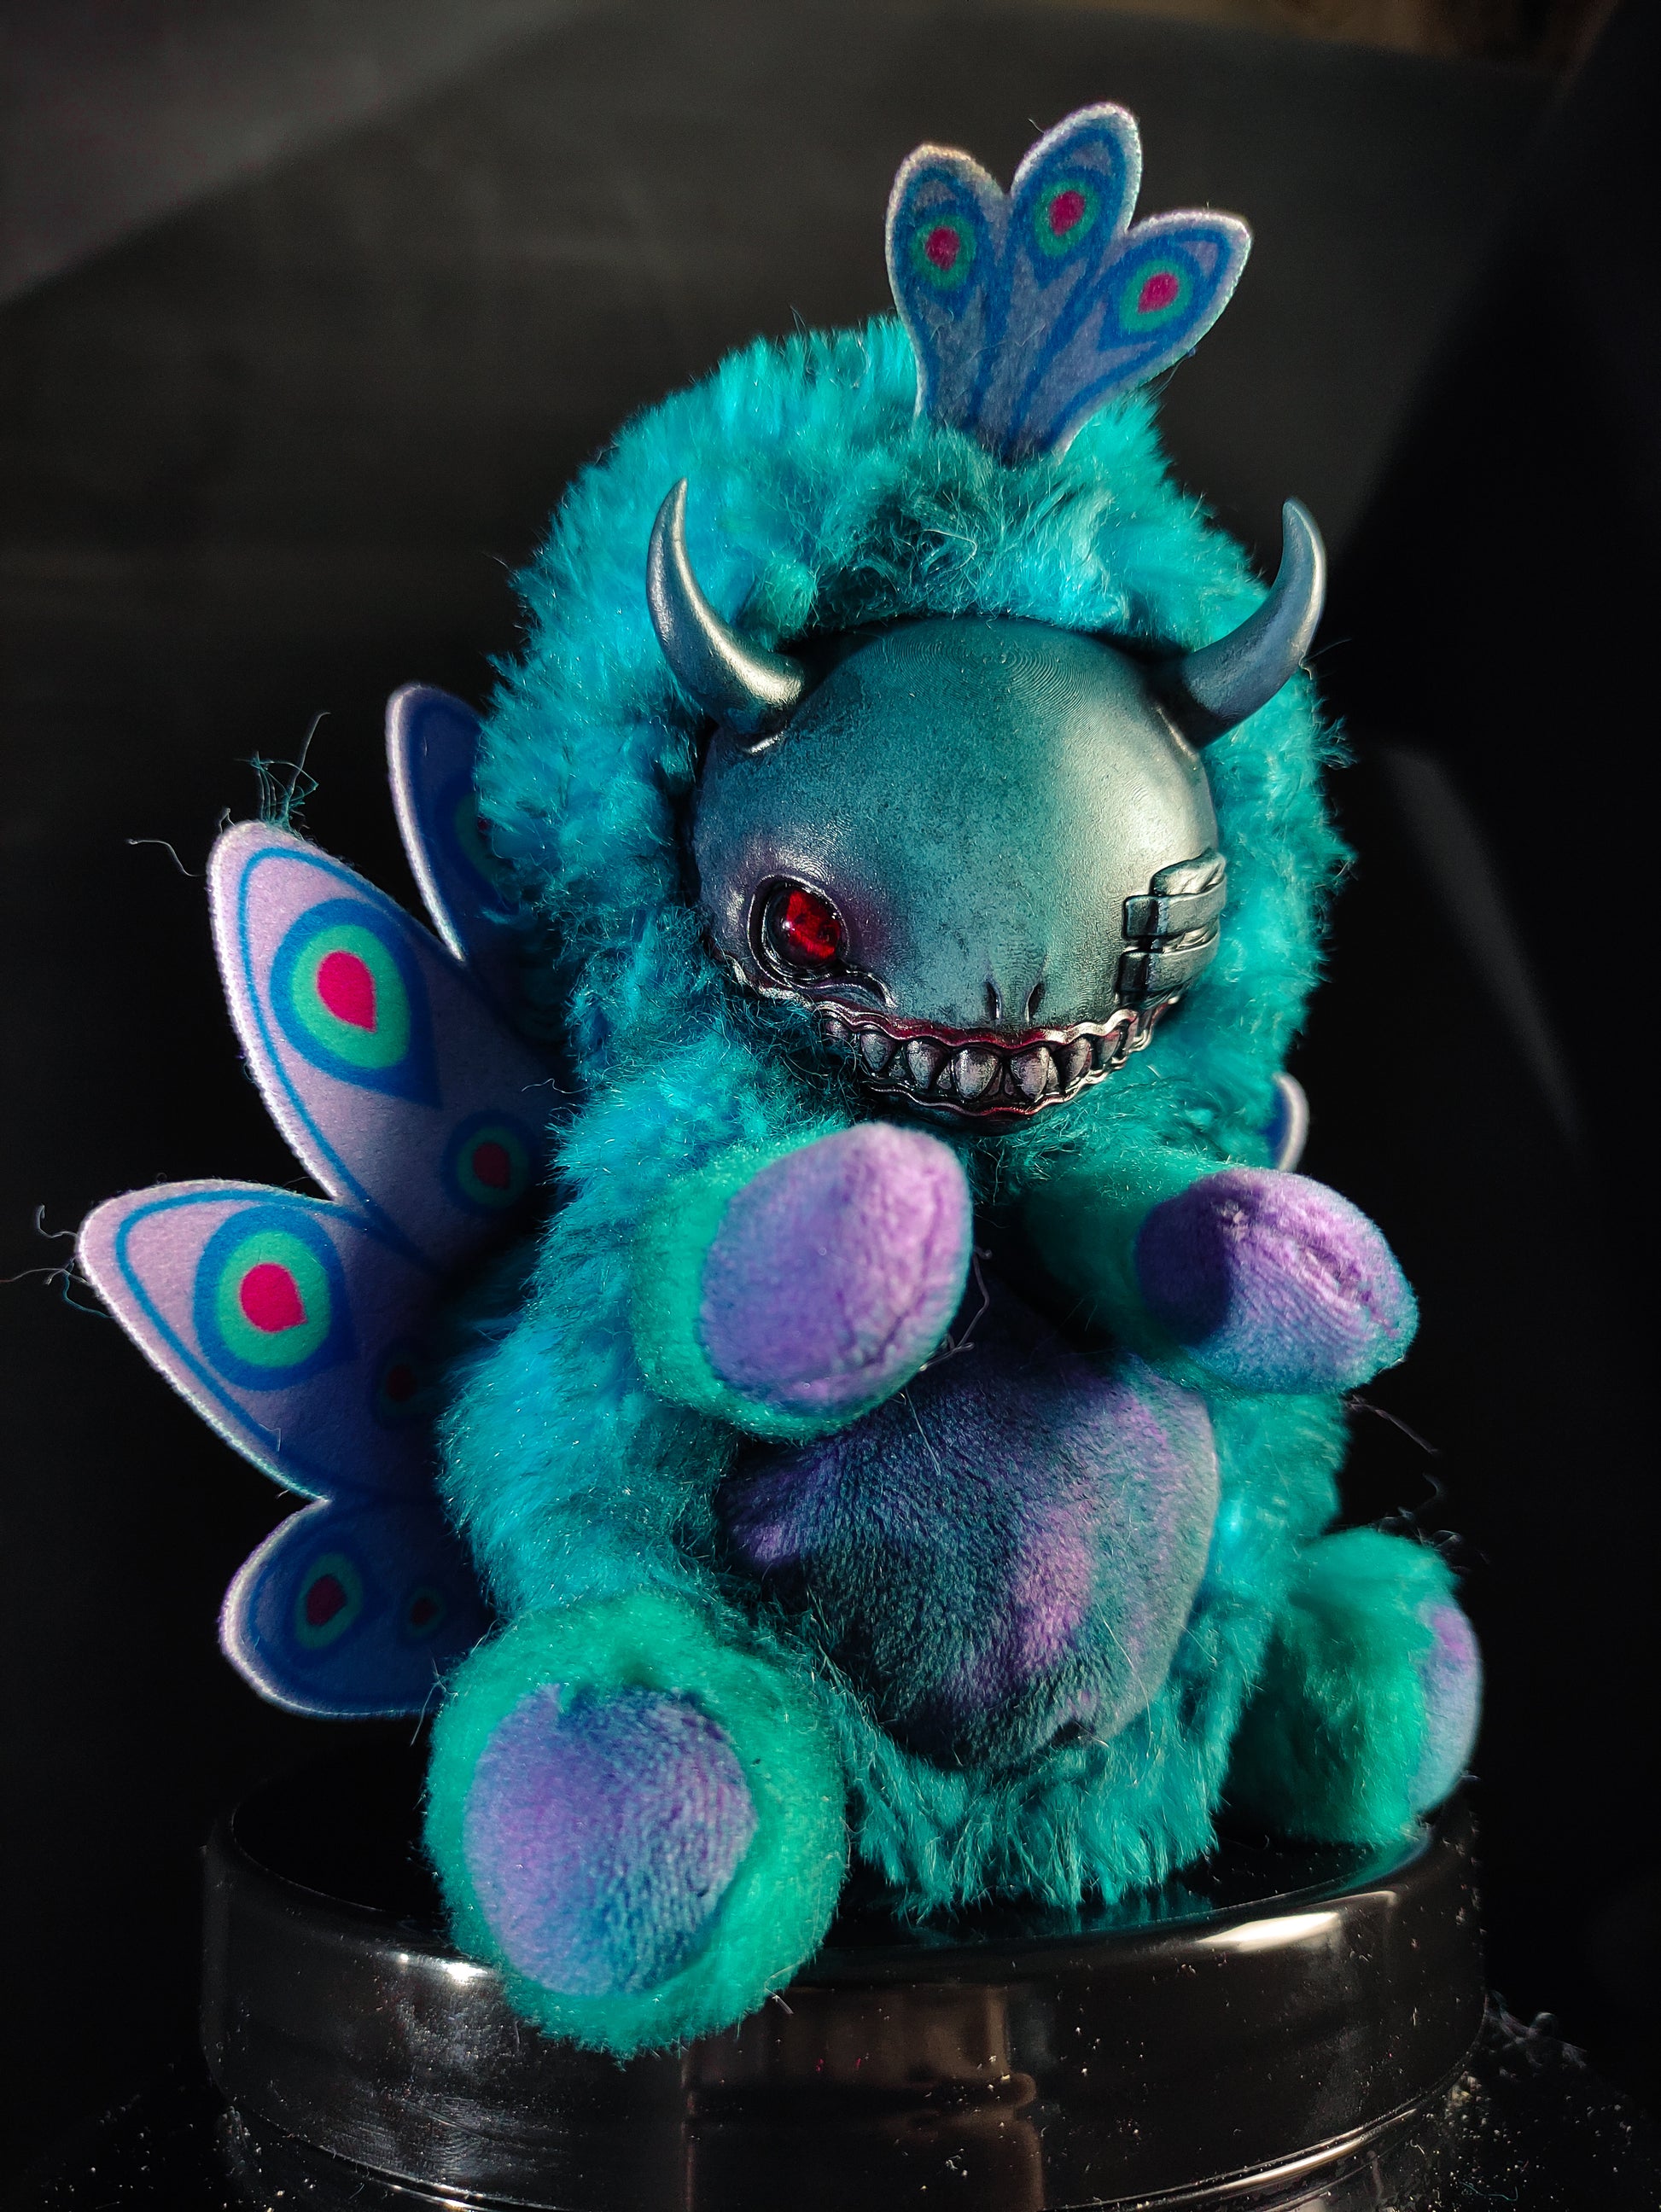 FRIEND Devilish Candy Flavour - Cryptid Art Doll Plush Toy